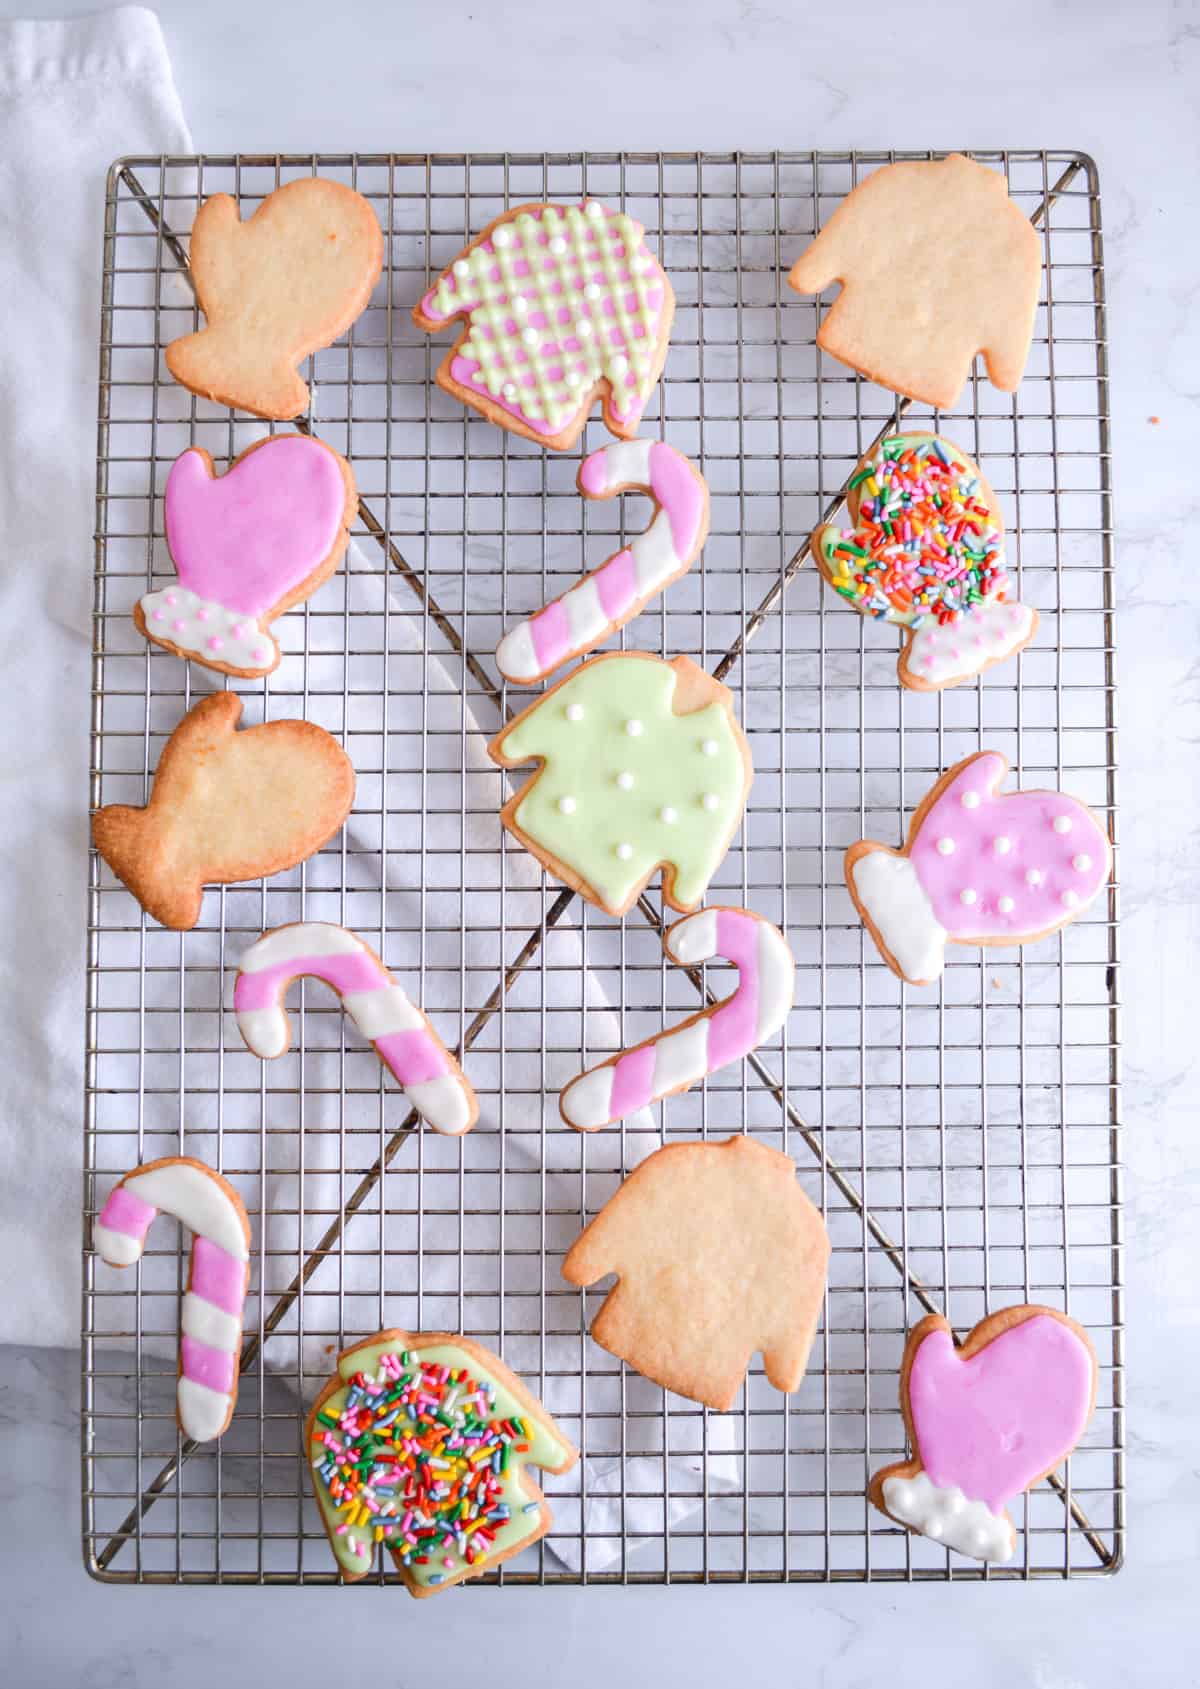 Vegan Holiday Cookies being decorated while on a wire racl